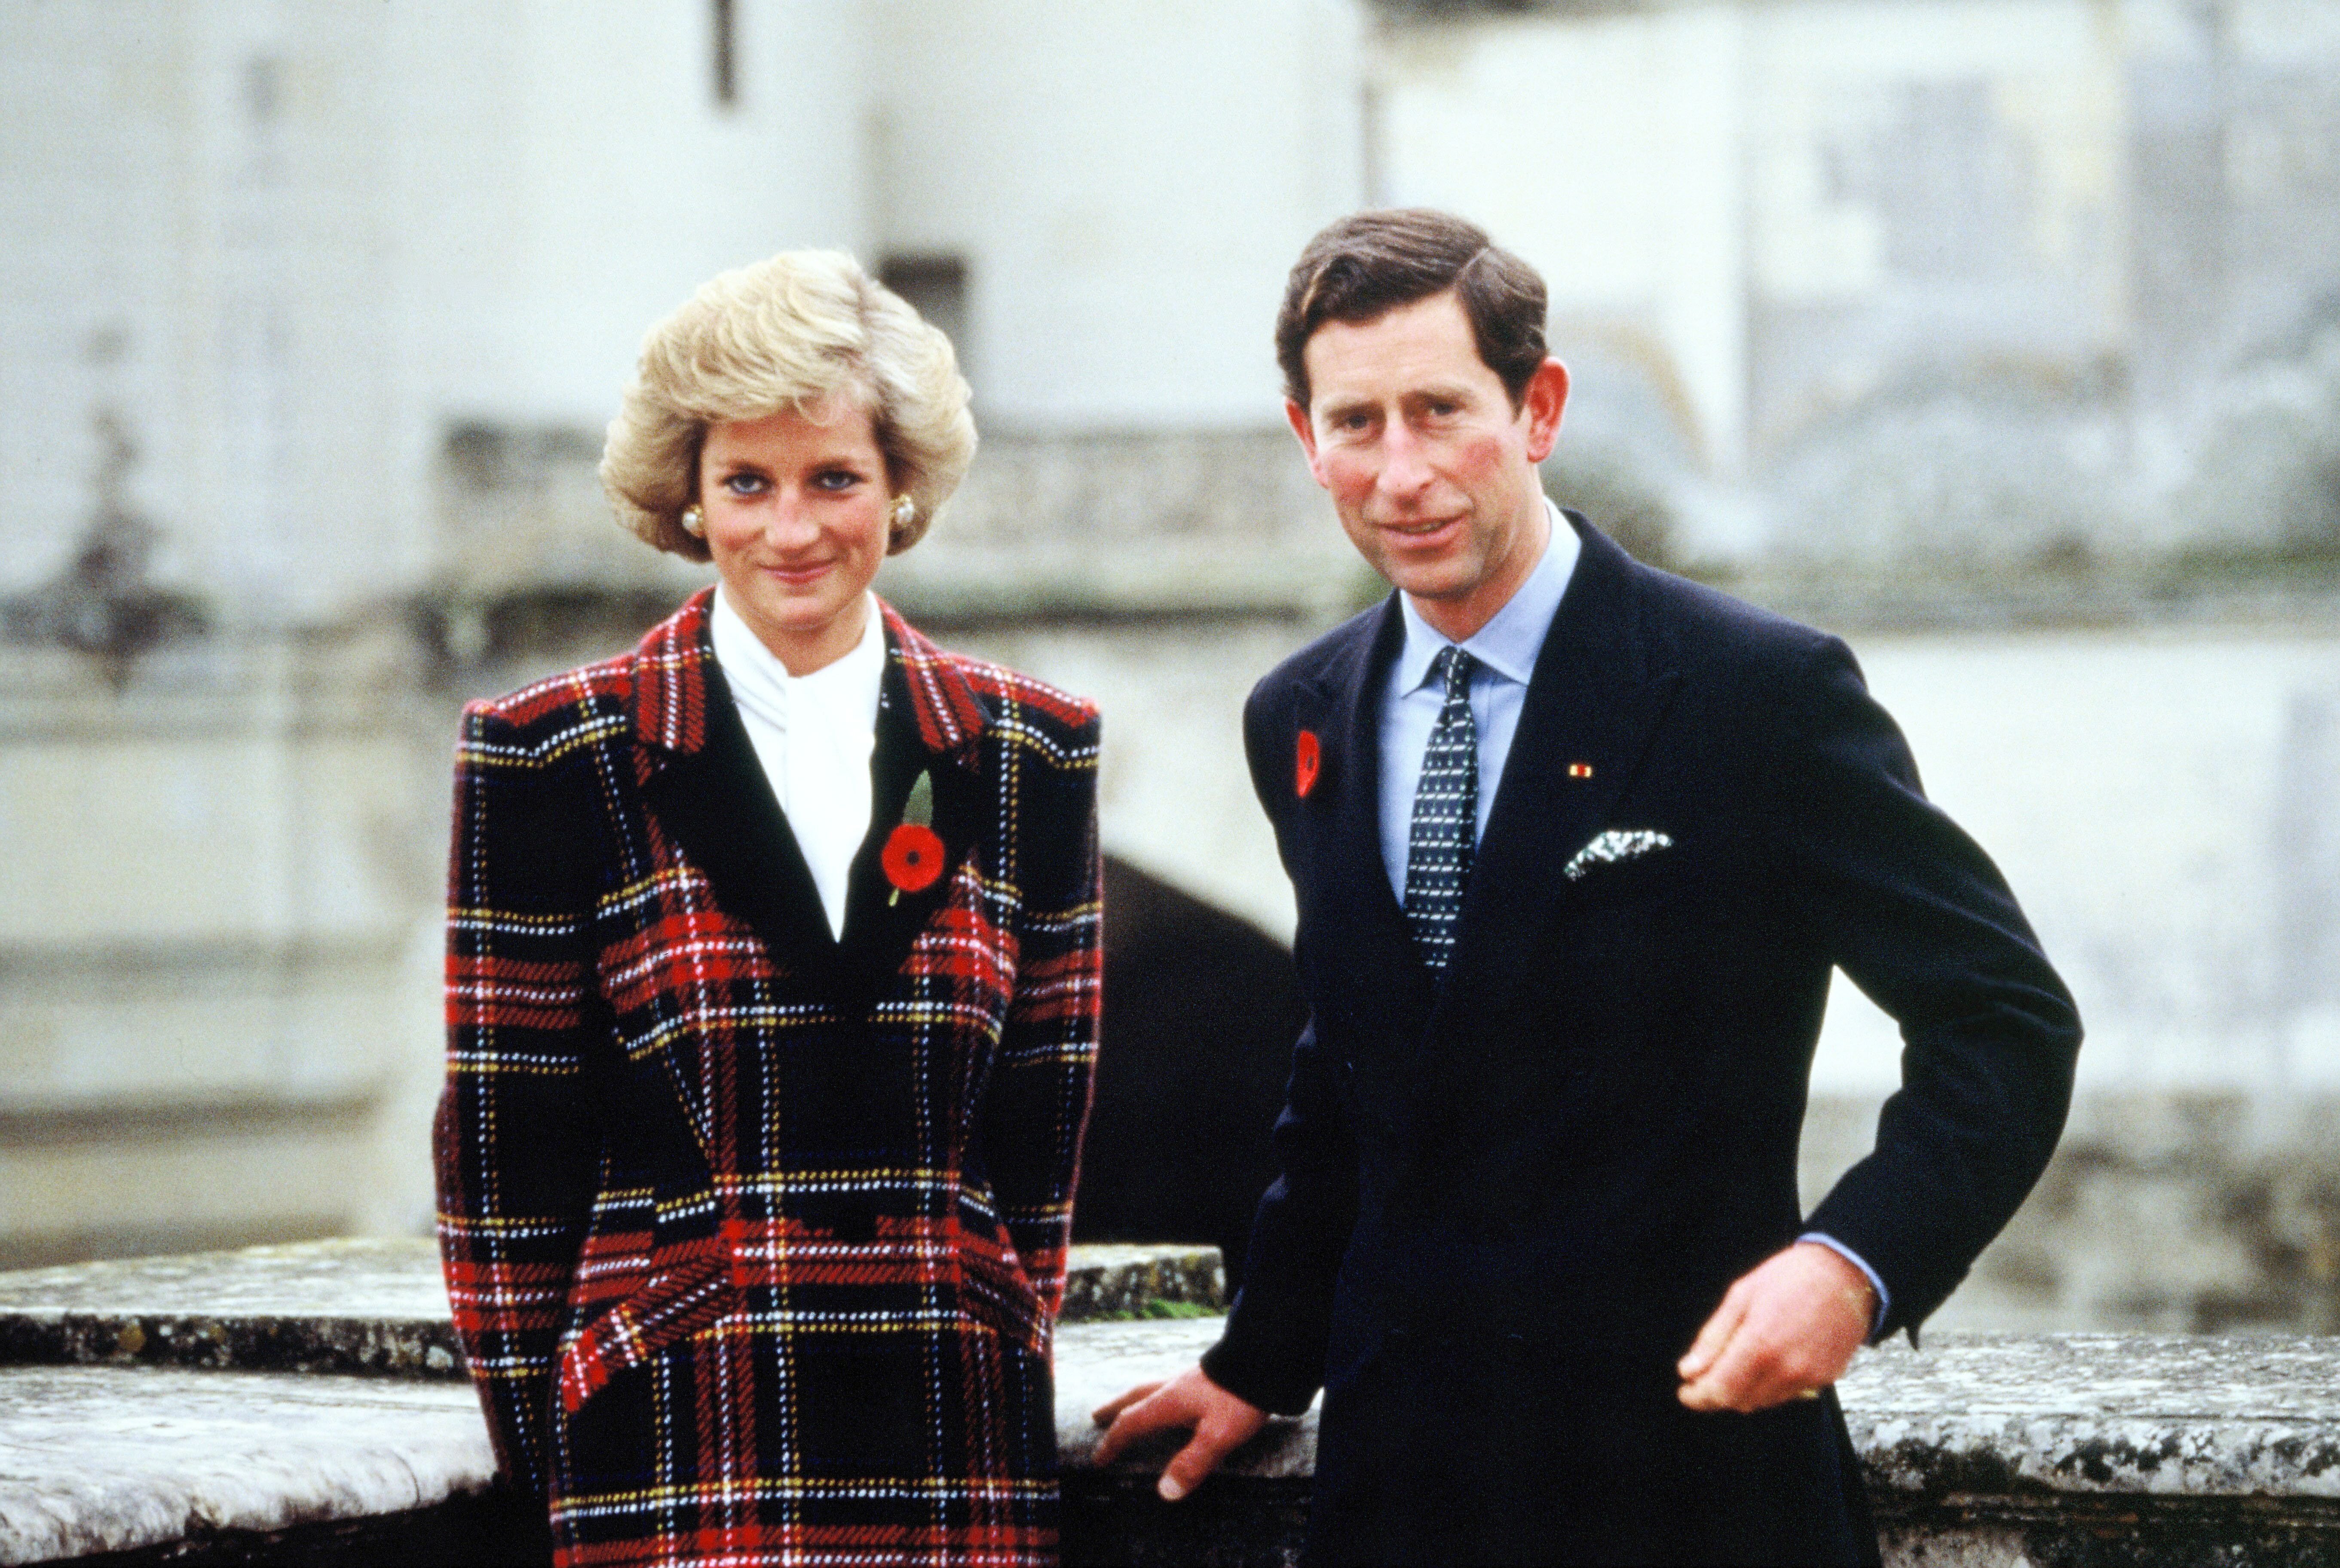 Prince Charles and Princess Diana pose outside Chateau de Chambord during their official visit to France on November 9, 1988. | Photo: Getty Images